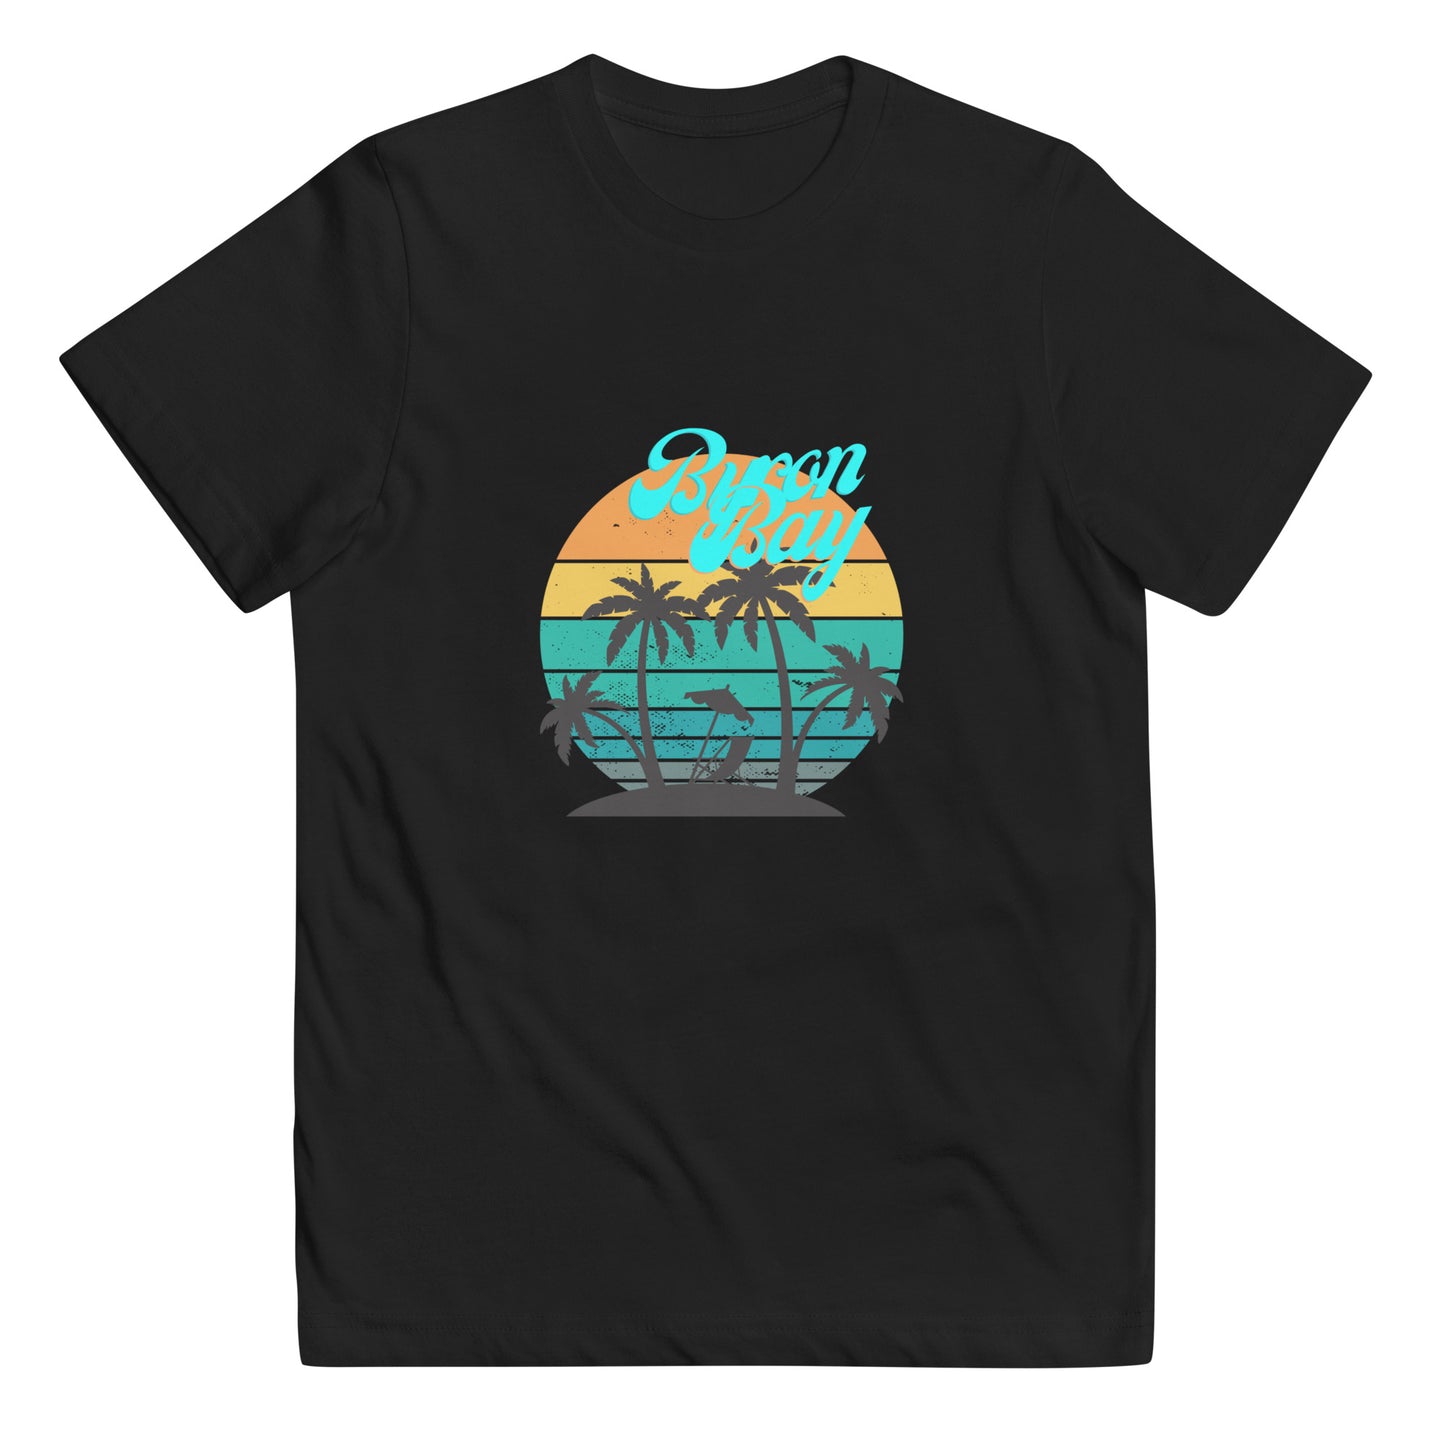  Kids T-Shirt - Black  - Front flat lay view - Byron Bay design on front - Genuine Byron Bay Merchandise | Produced by Go Sea Kayak Byron Bay 